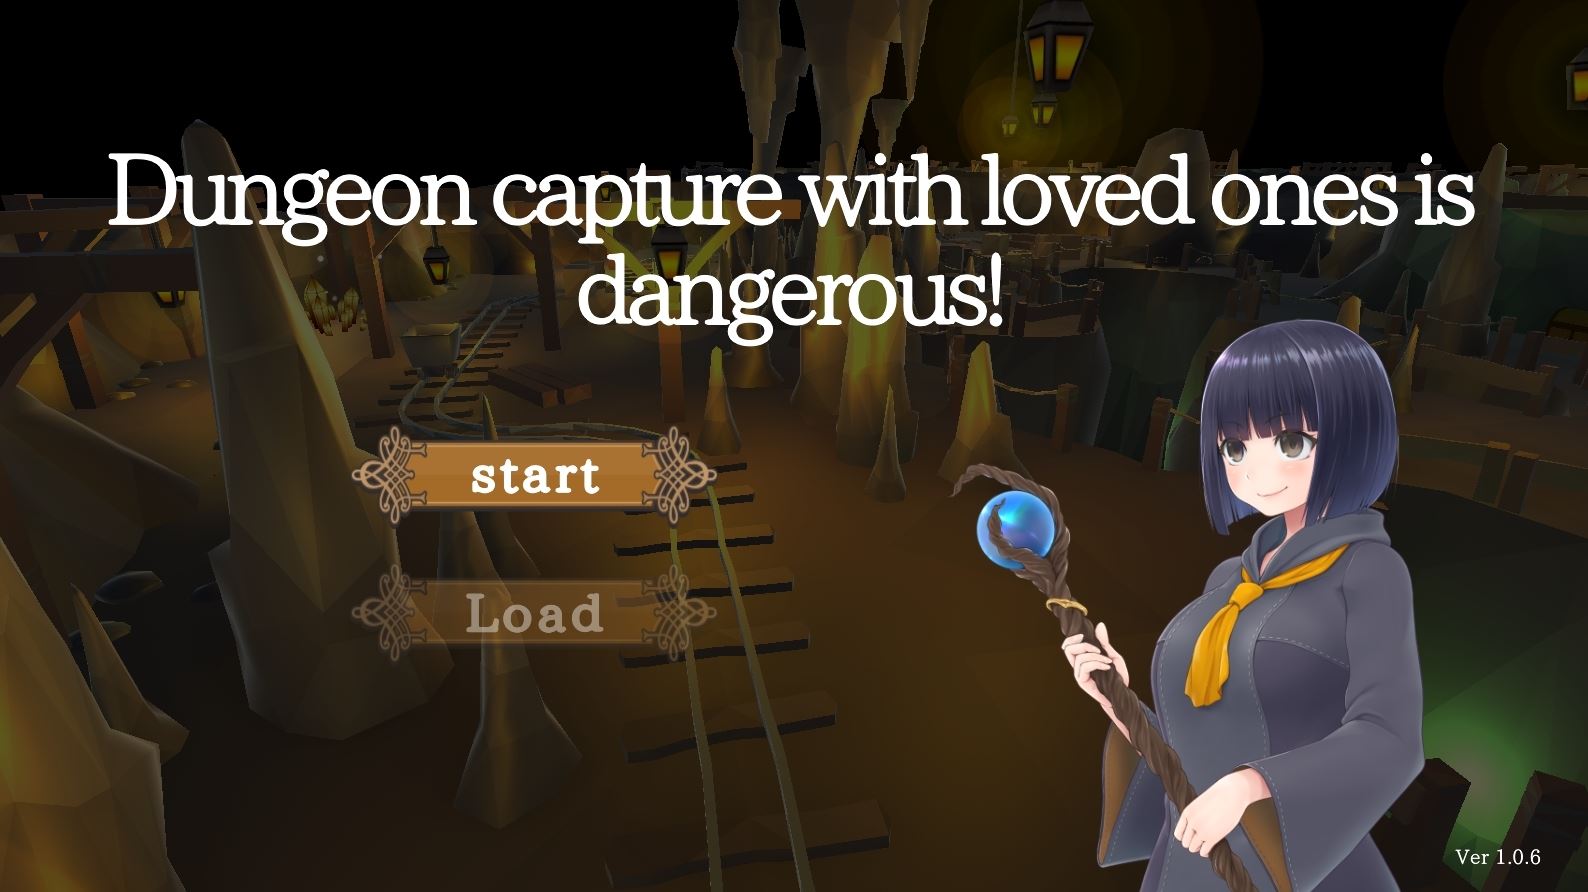 Dungeon capture with loved ones is dangerous! [Finished] - Version: Final